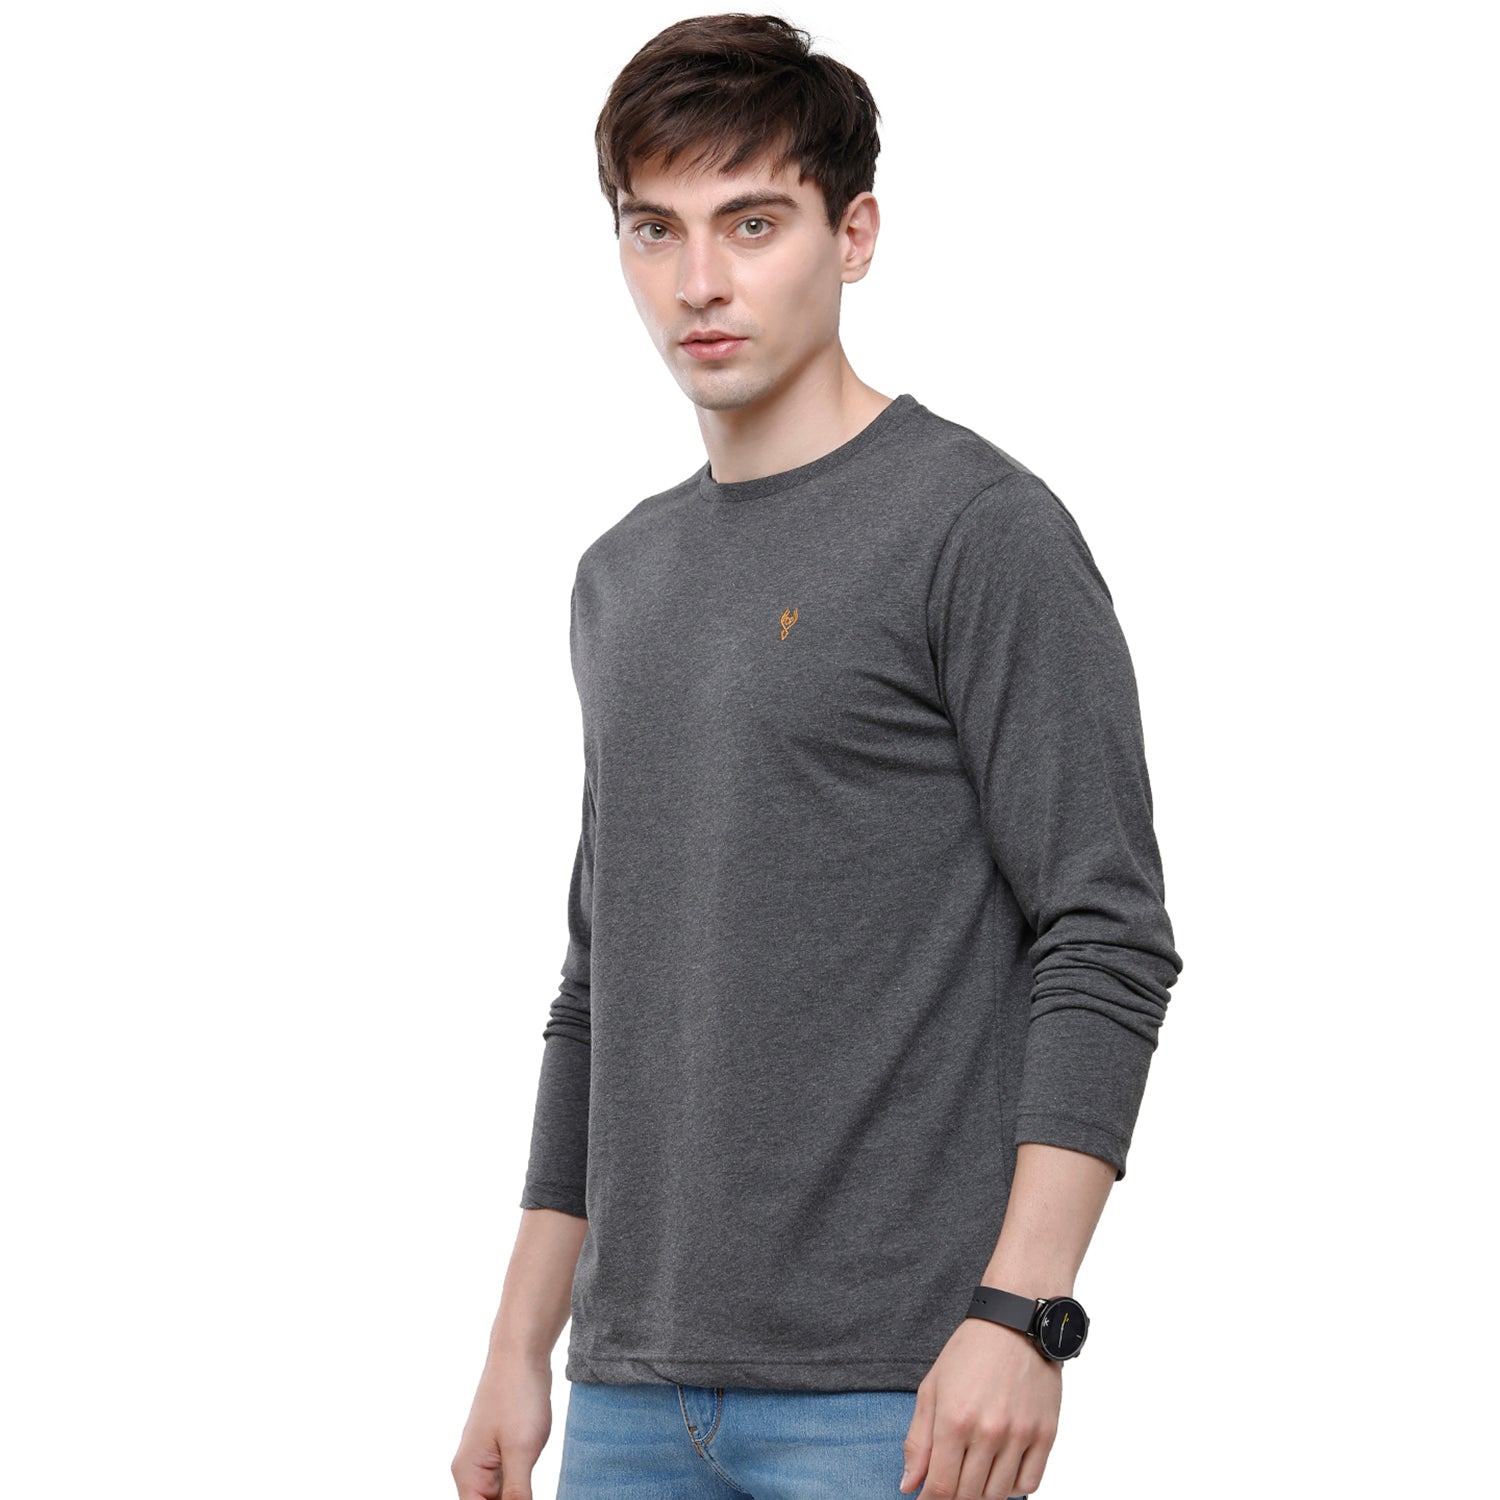 Classic polo Men's Grey Single Jersey Crew Neck Full Sleeve Slim Fit T-Shirt - Comet 03 T-shirt Classic Polo 